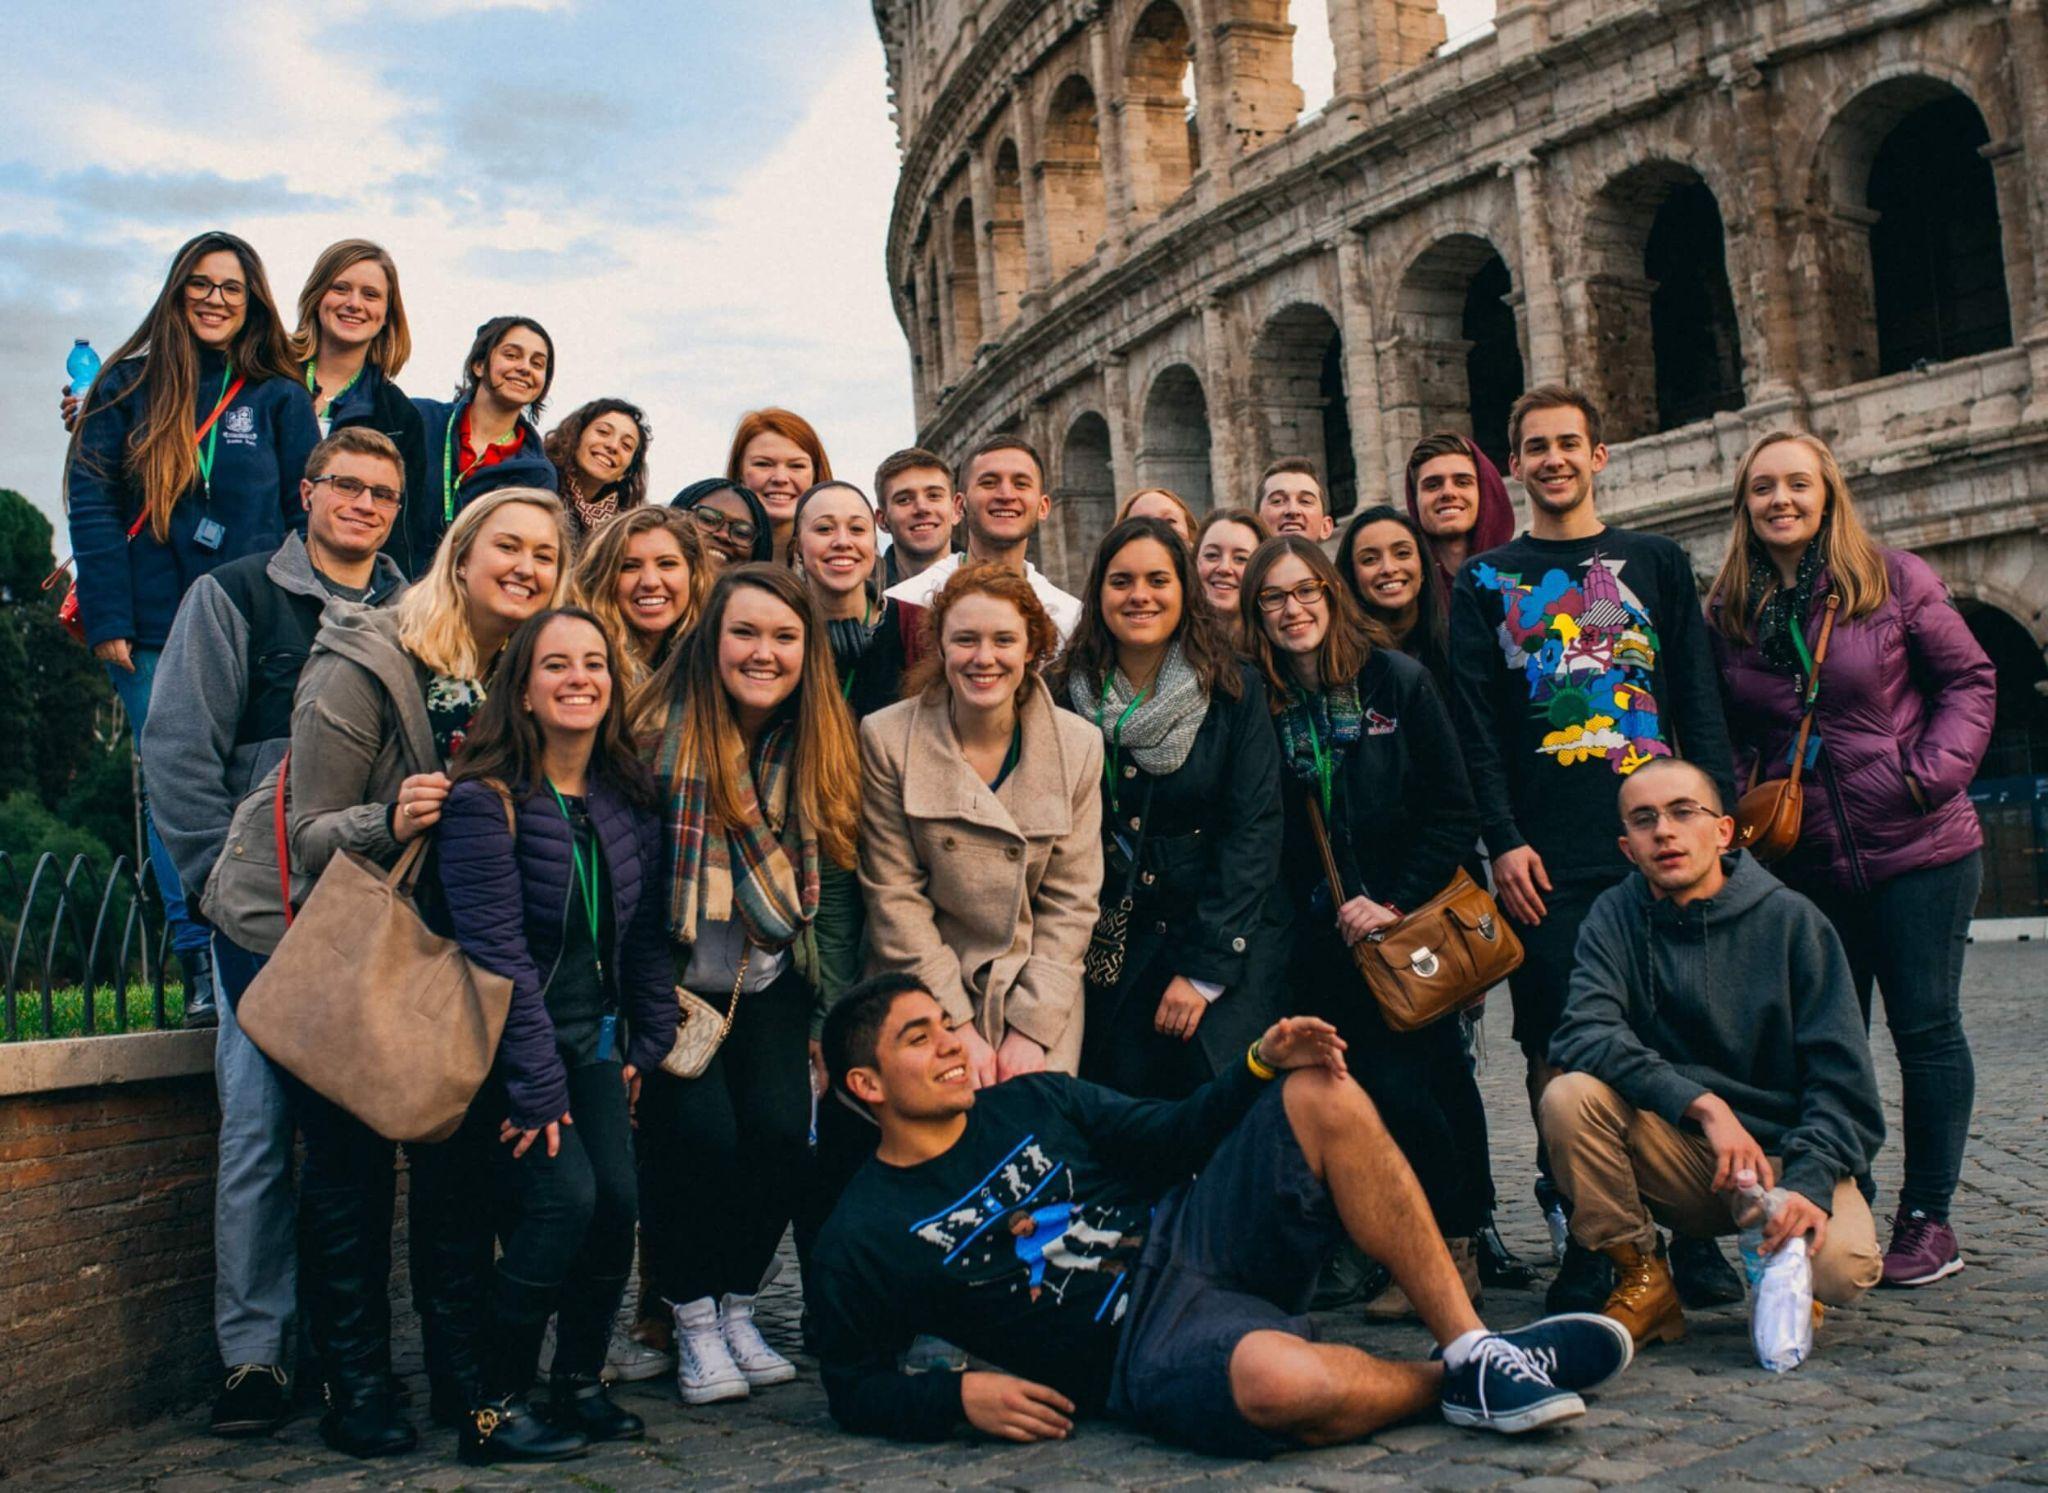 Group of John Cabot University students in front of the Colosseum, sharing a moment of joy during their sustainability studies.